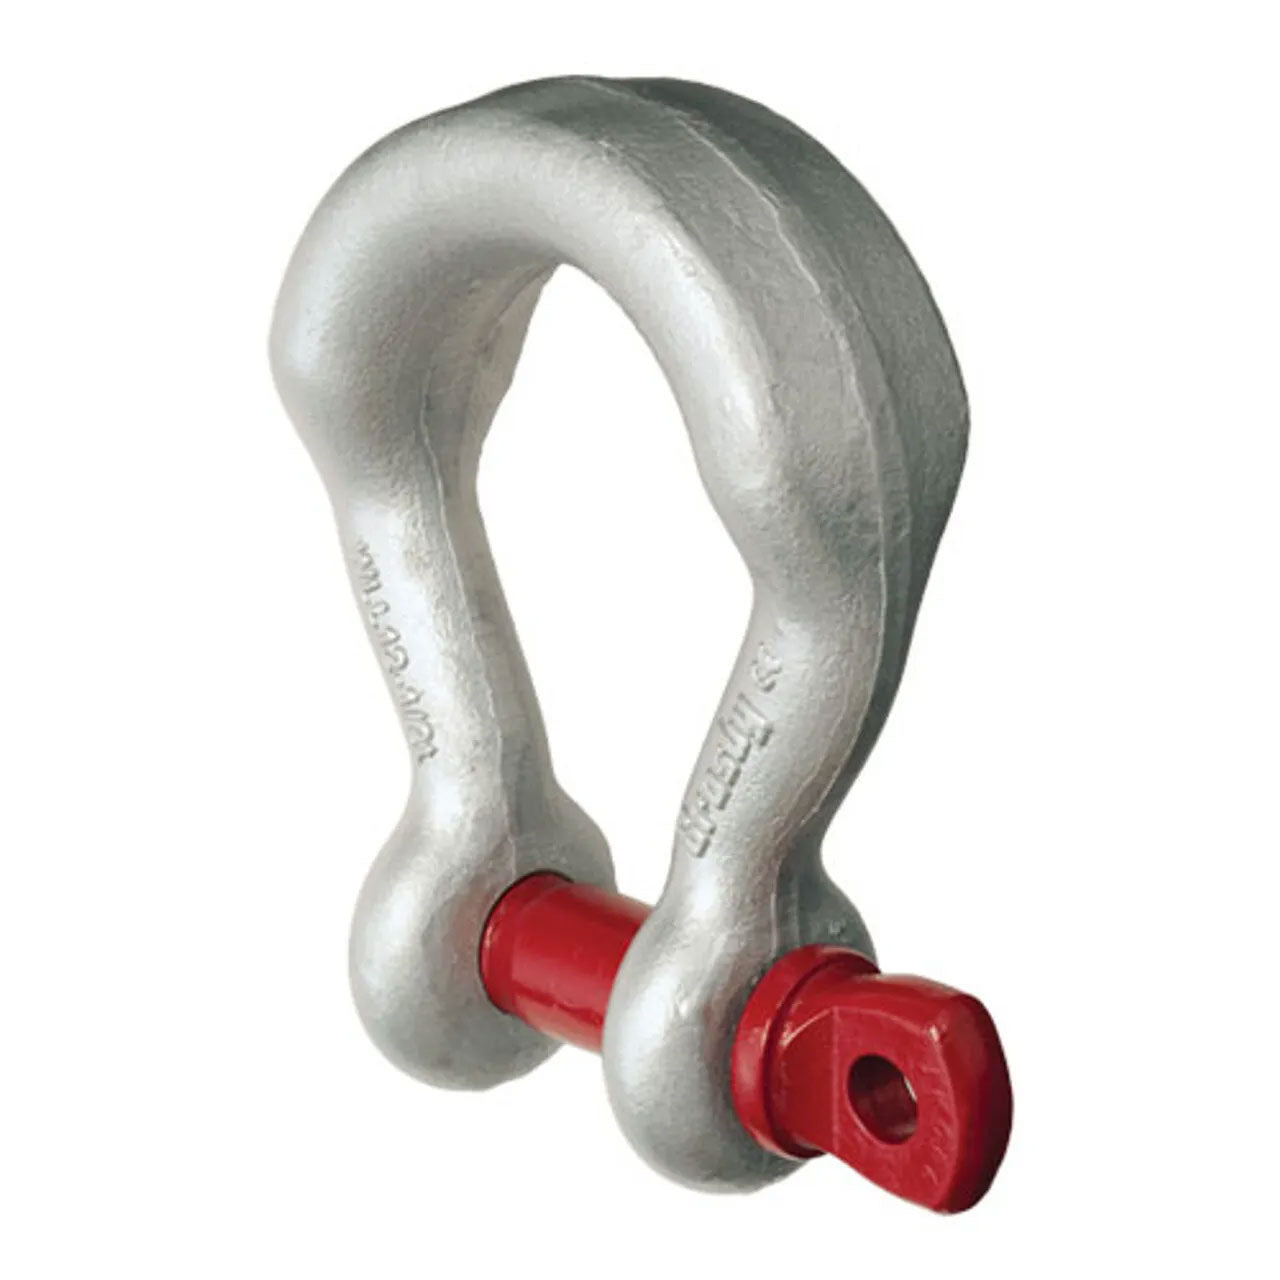  Crosby® Screw Pin Wide Body Shackle | G-2169 - 7 Ton primary image